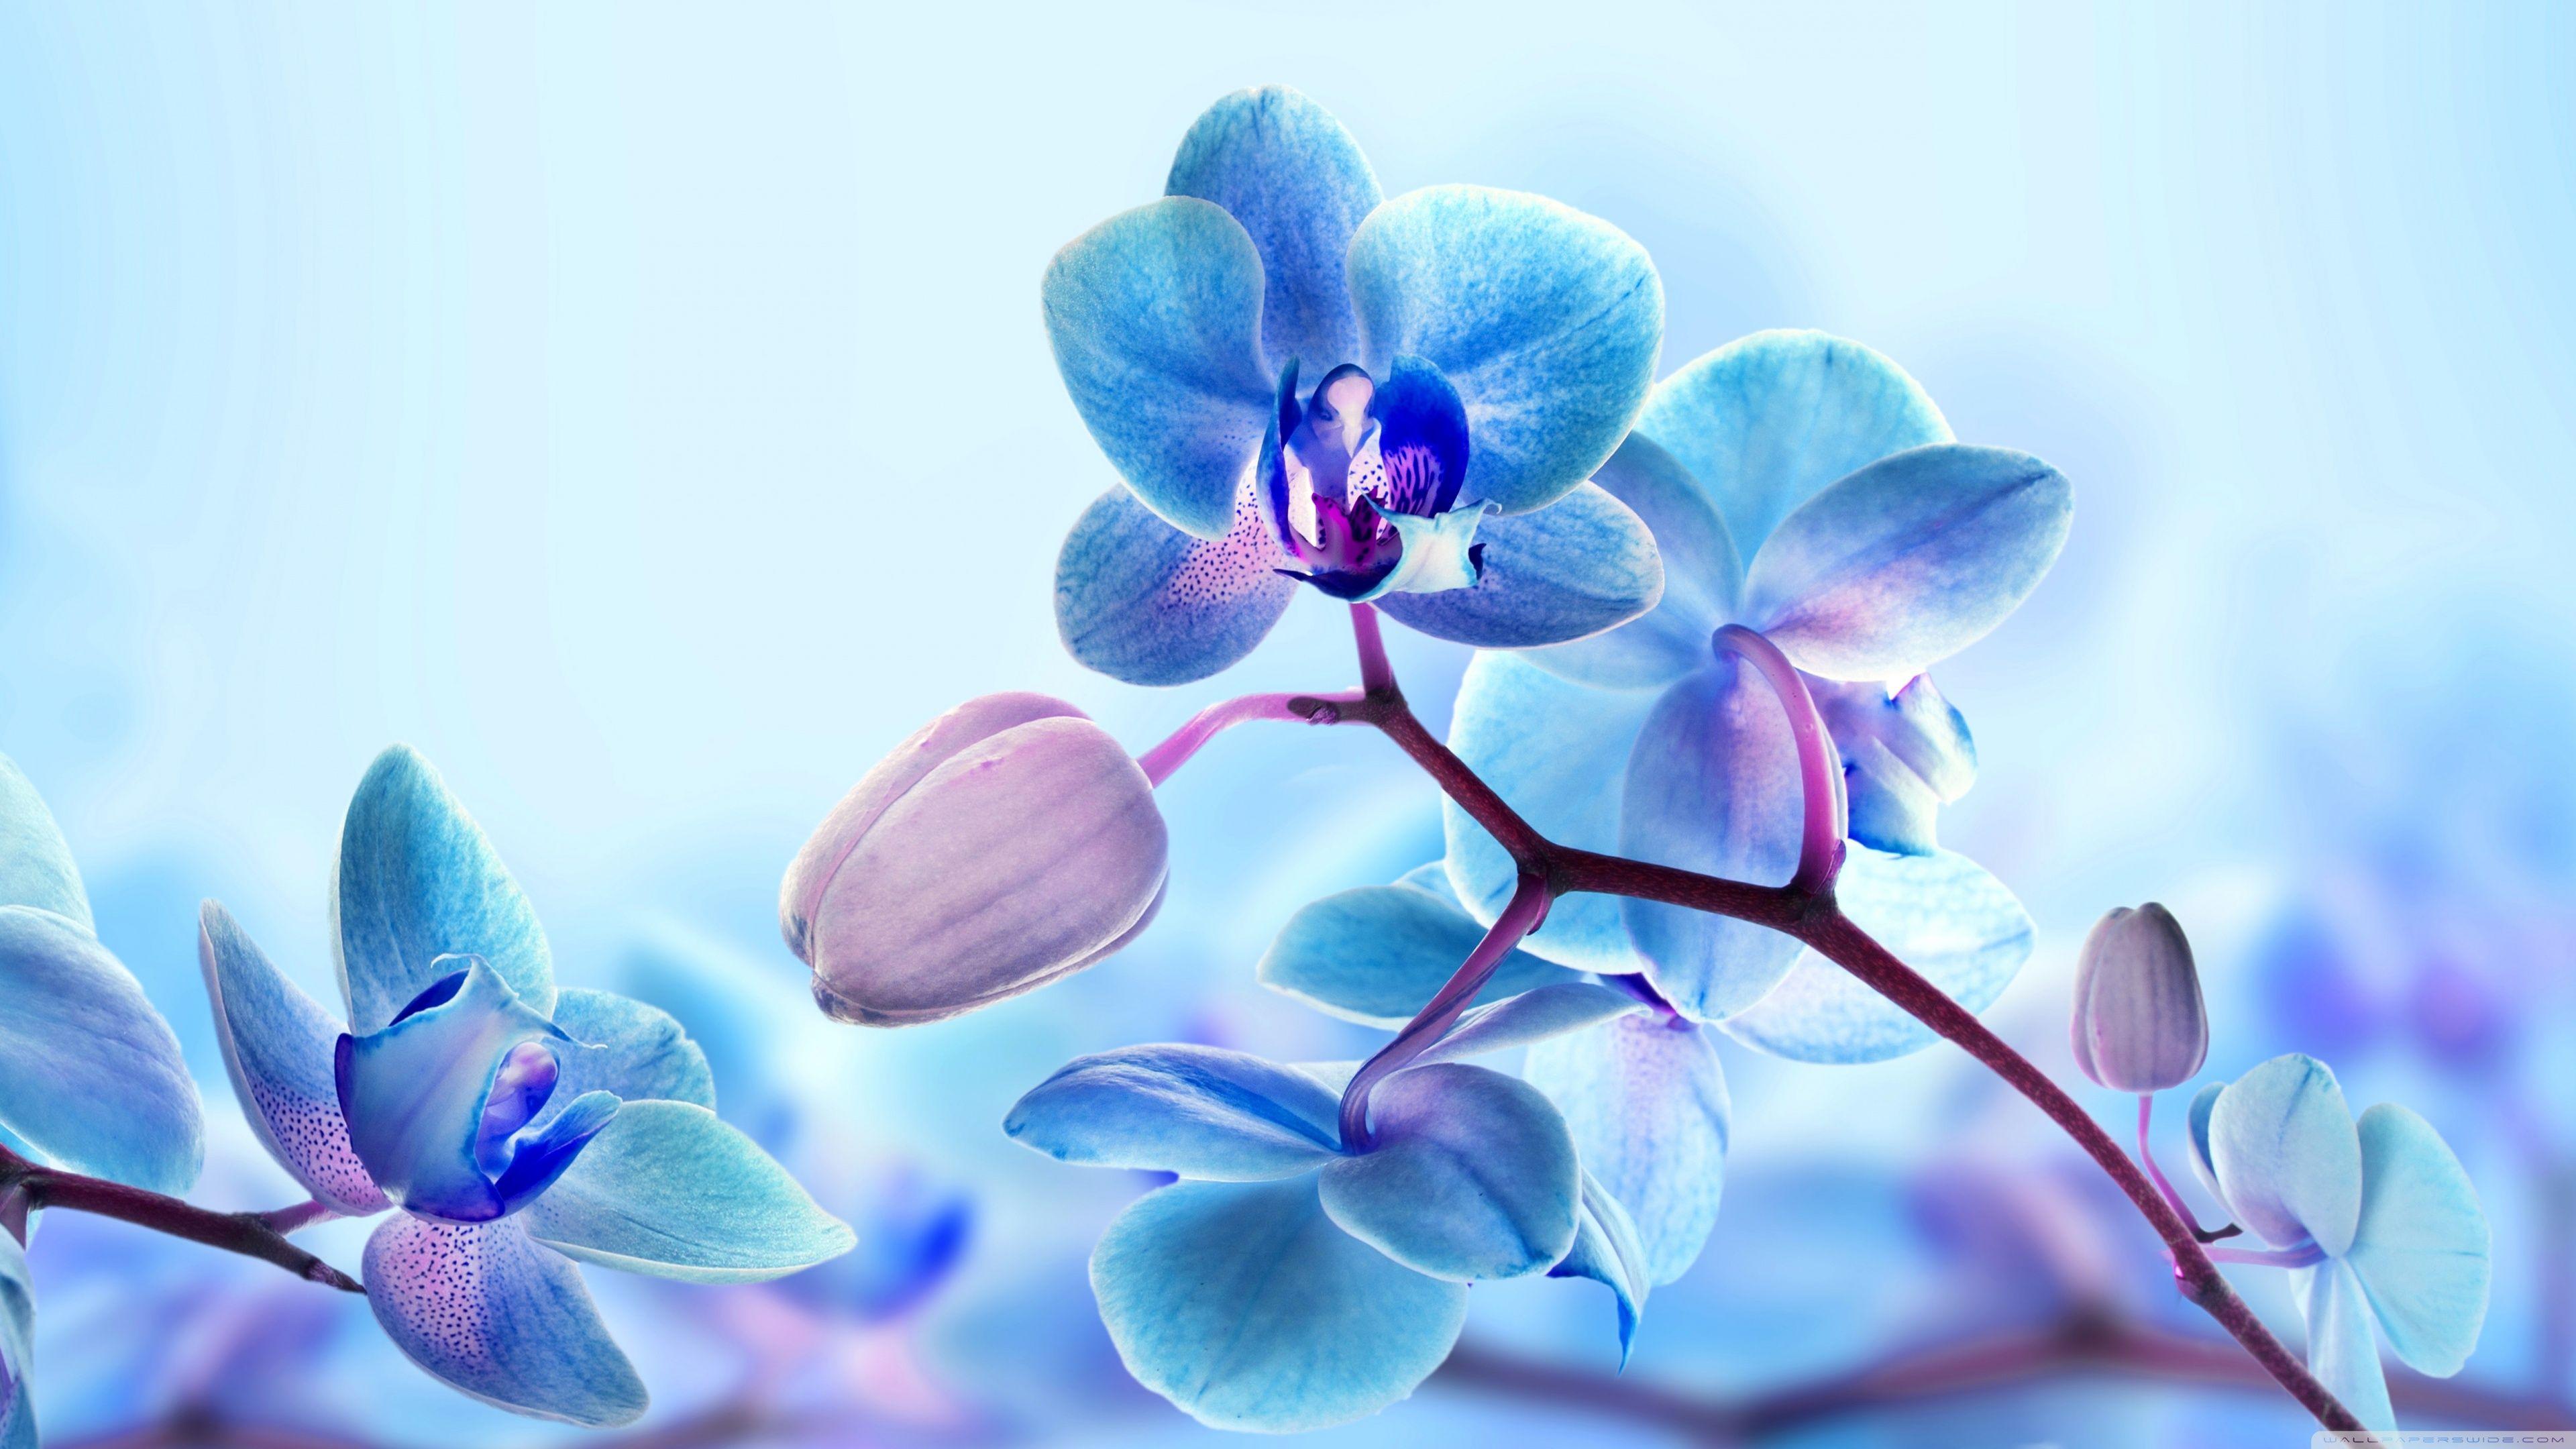 Orchid Flower 4K Wallpapers - Wallpaper Cave